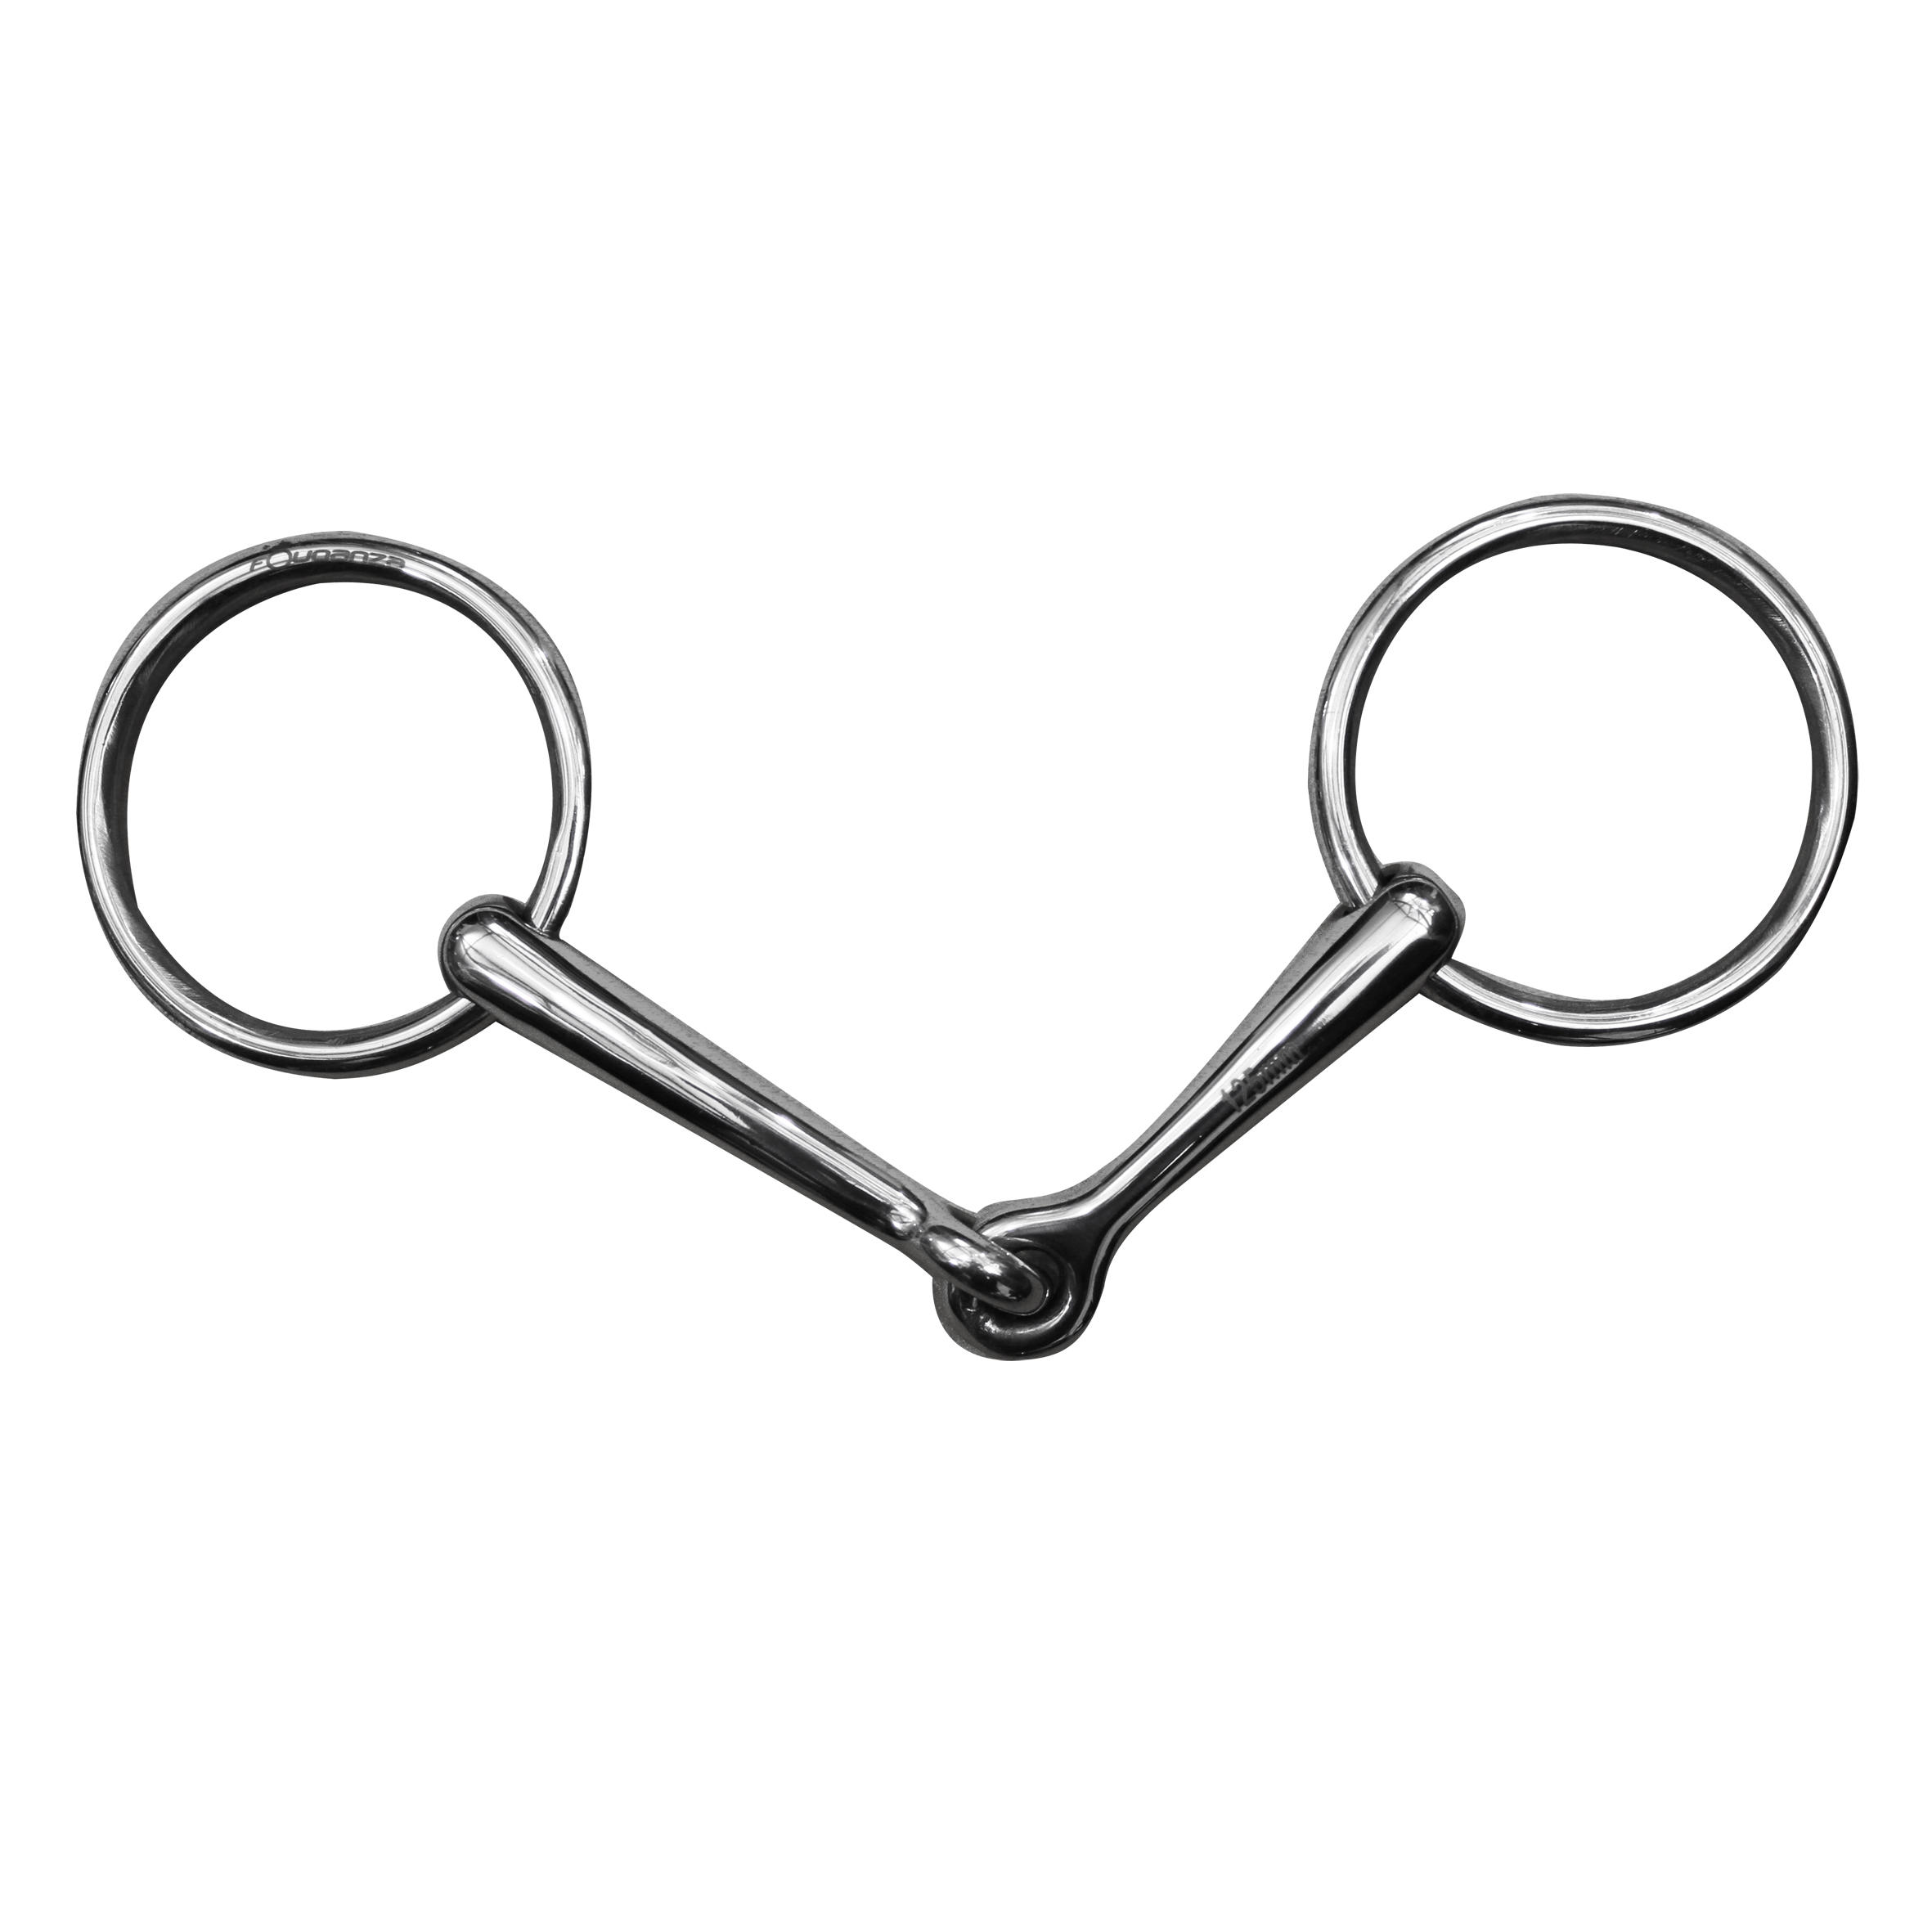 FOUGANZA Stainless Steel Horse Riding Curb Bit For Horse/Pony